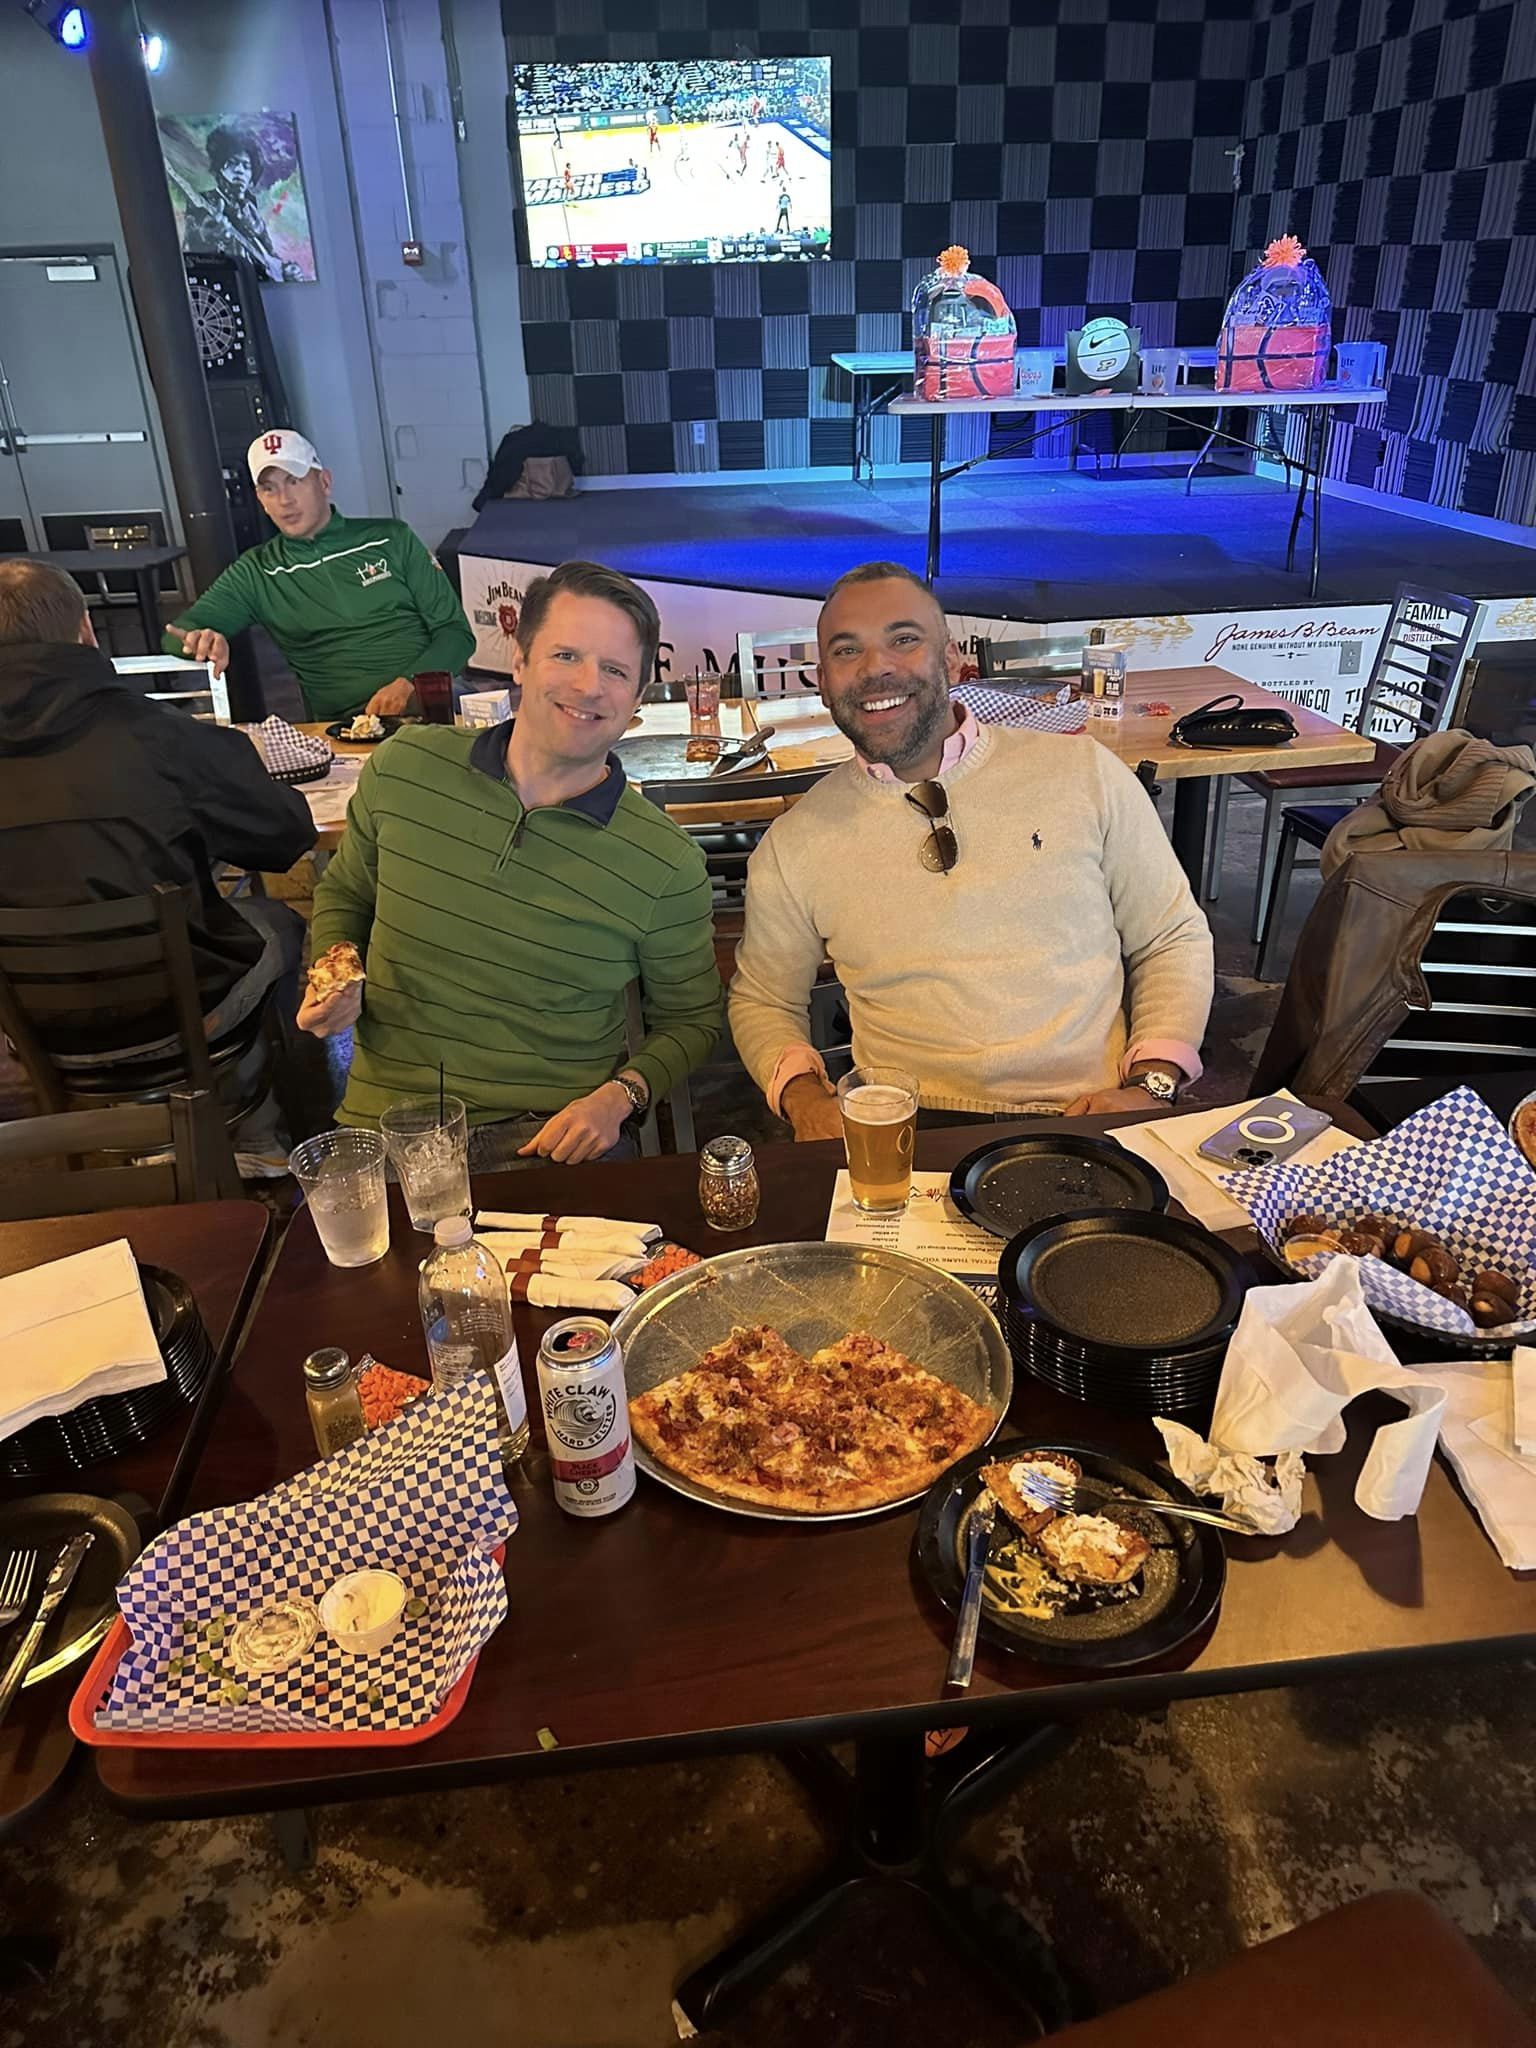 Two men eating pizza and smiling at the camera